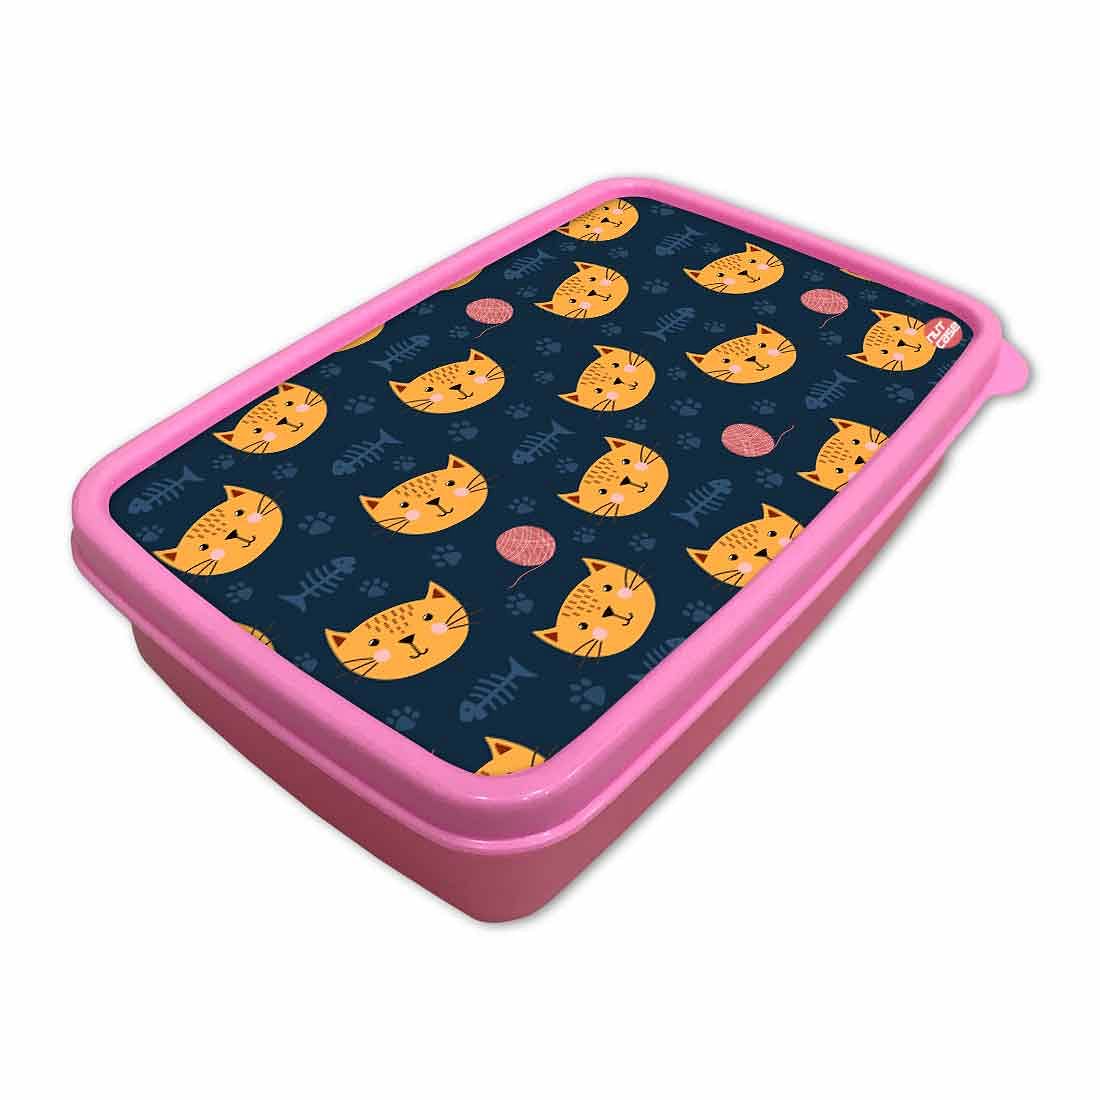 Designer Kids Lunch Box for School Return Gifts Birthday Party - Cute Cat Nutcase